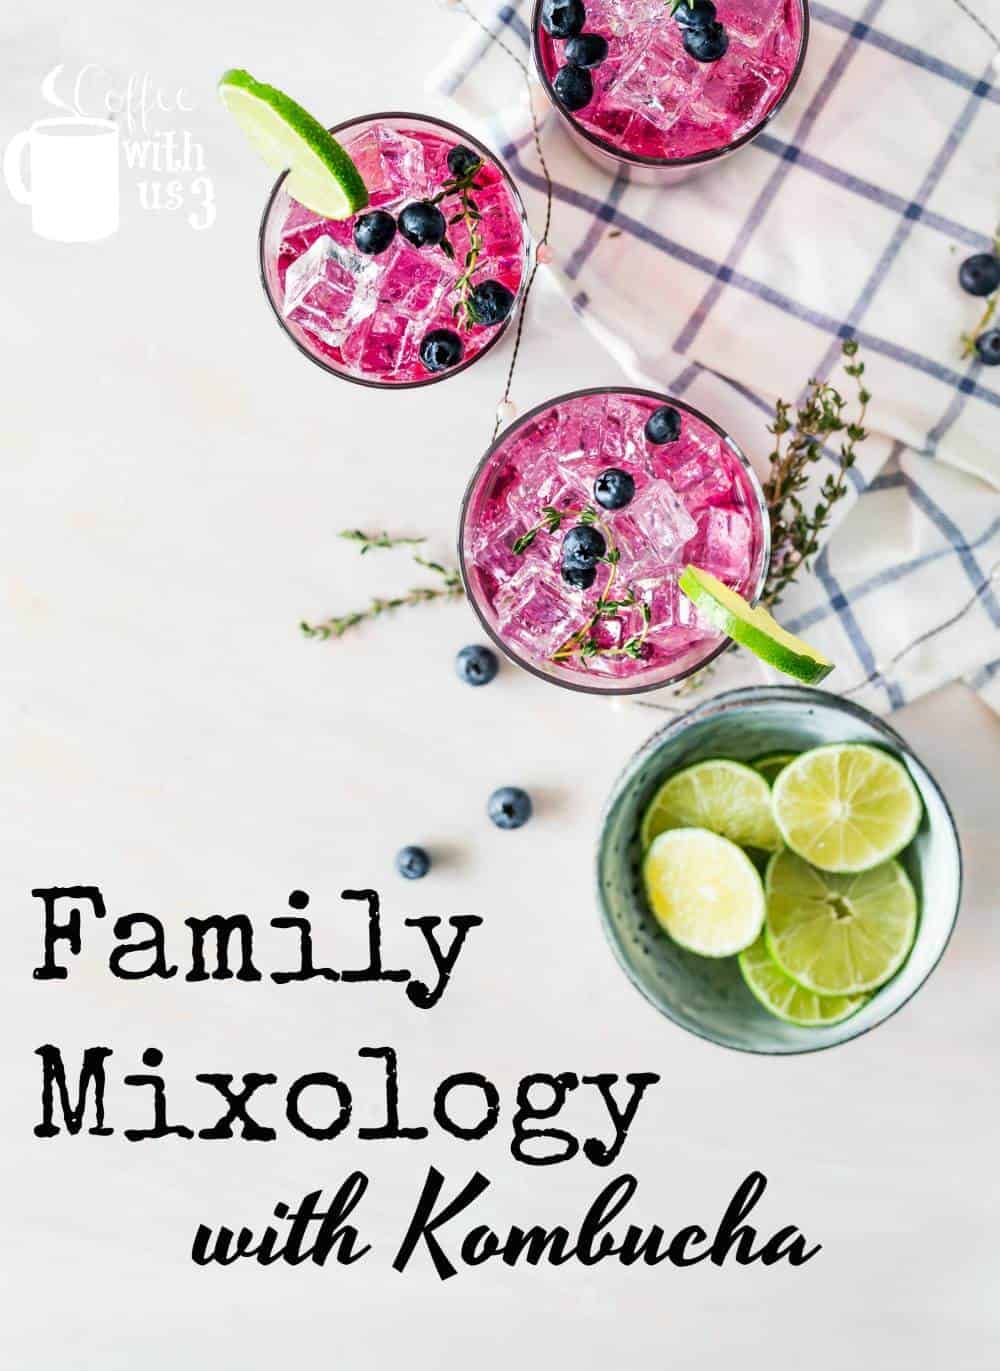 Family Mixology with Kombucha can be a fun way to connect with each other!